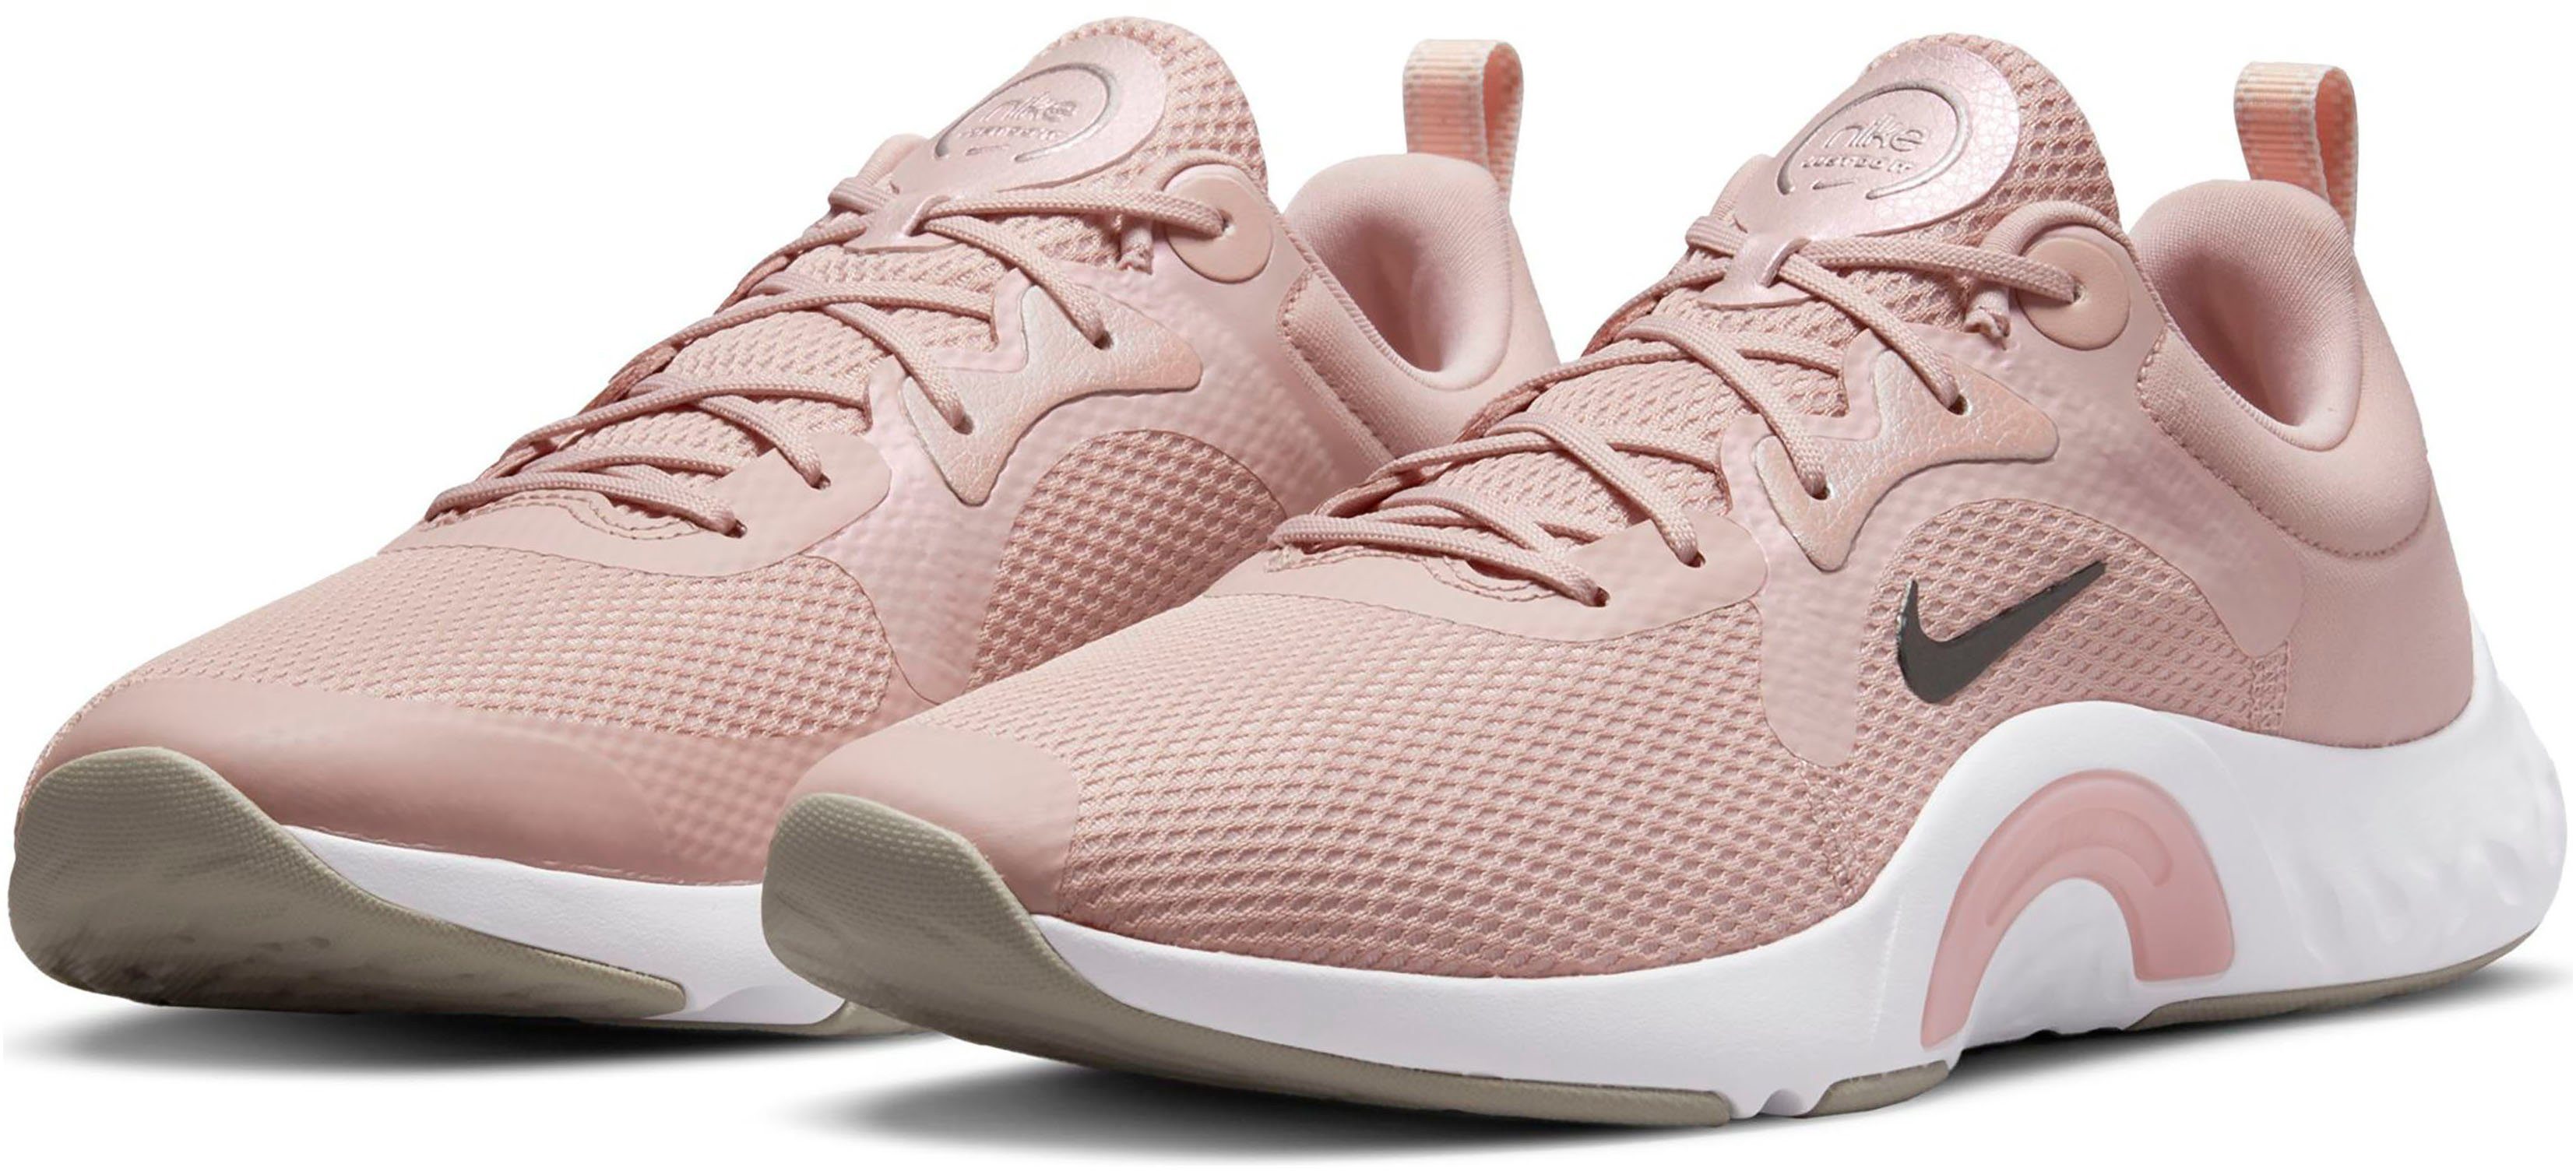 Nike RENEW IN-SEASON TR 11 Fitnessschuh PINK-OXFORD-MTLC-PEWTER-PALE-CORAL-WHITE